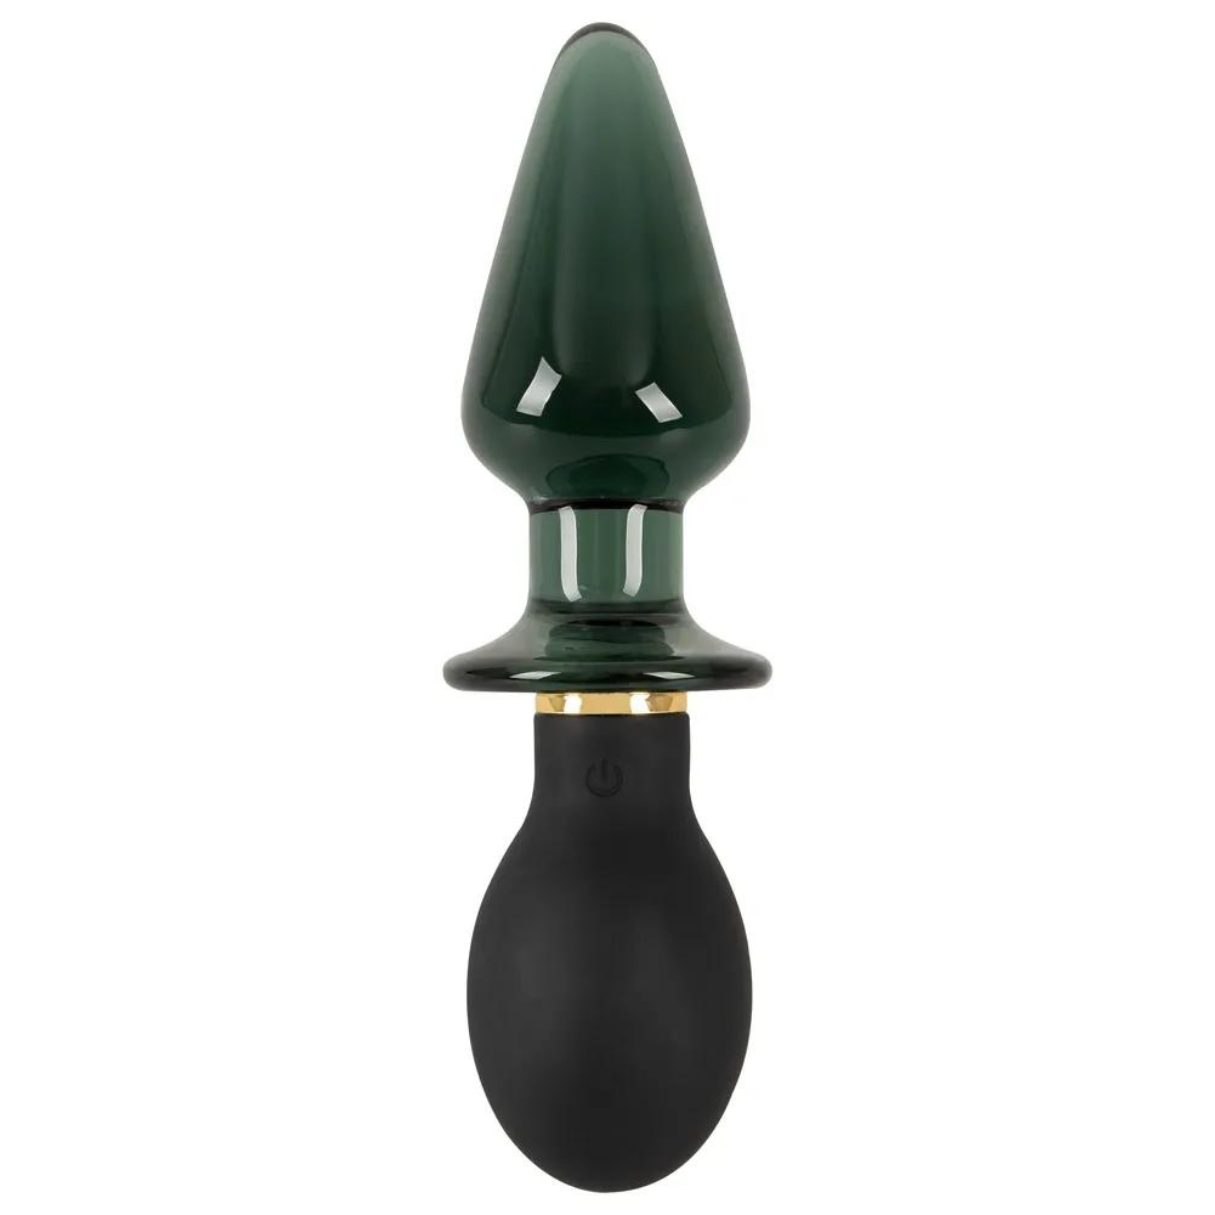 Vibration ORION Double-ended Plug Vibrator with Butt